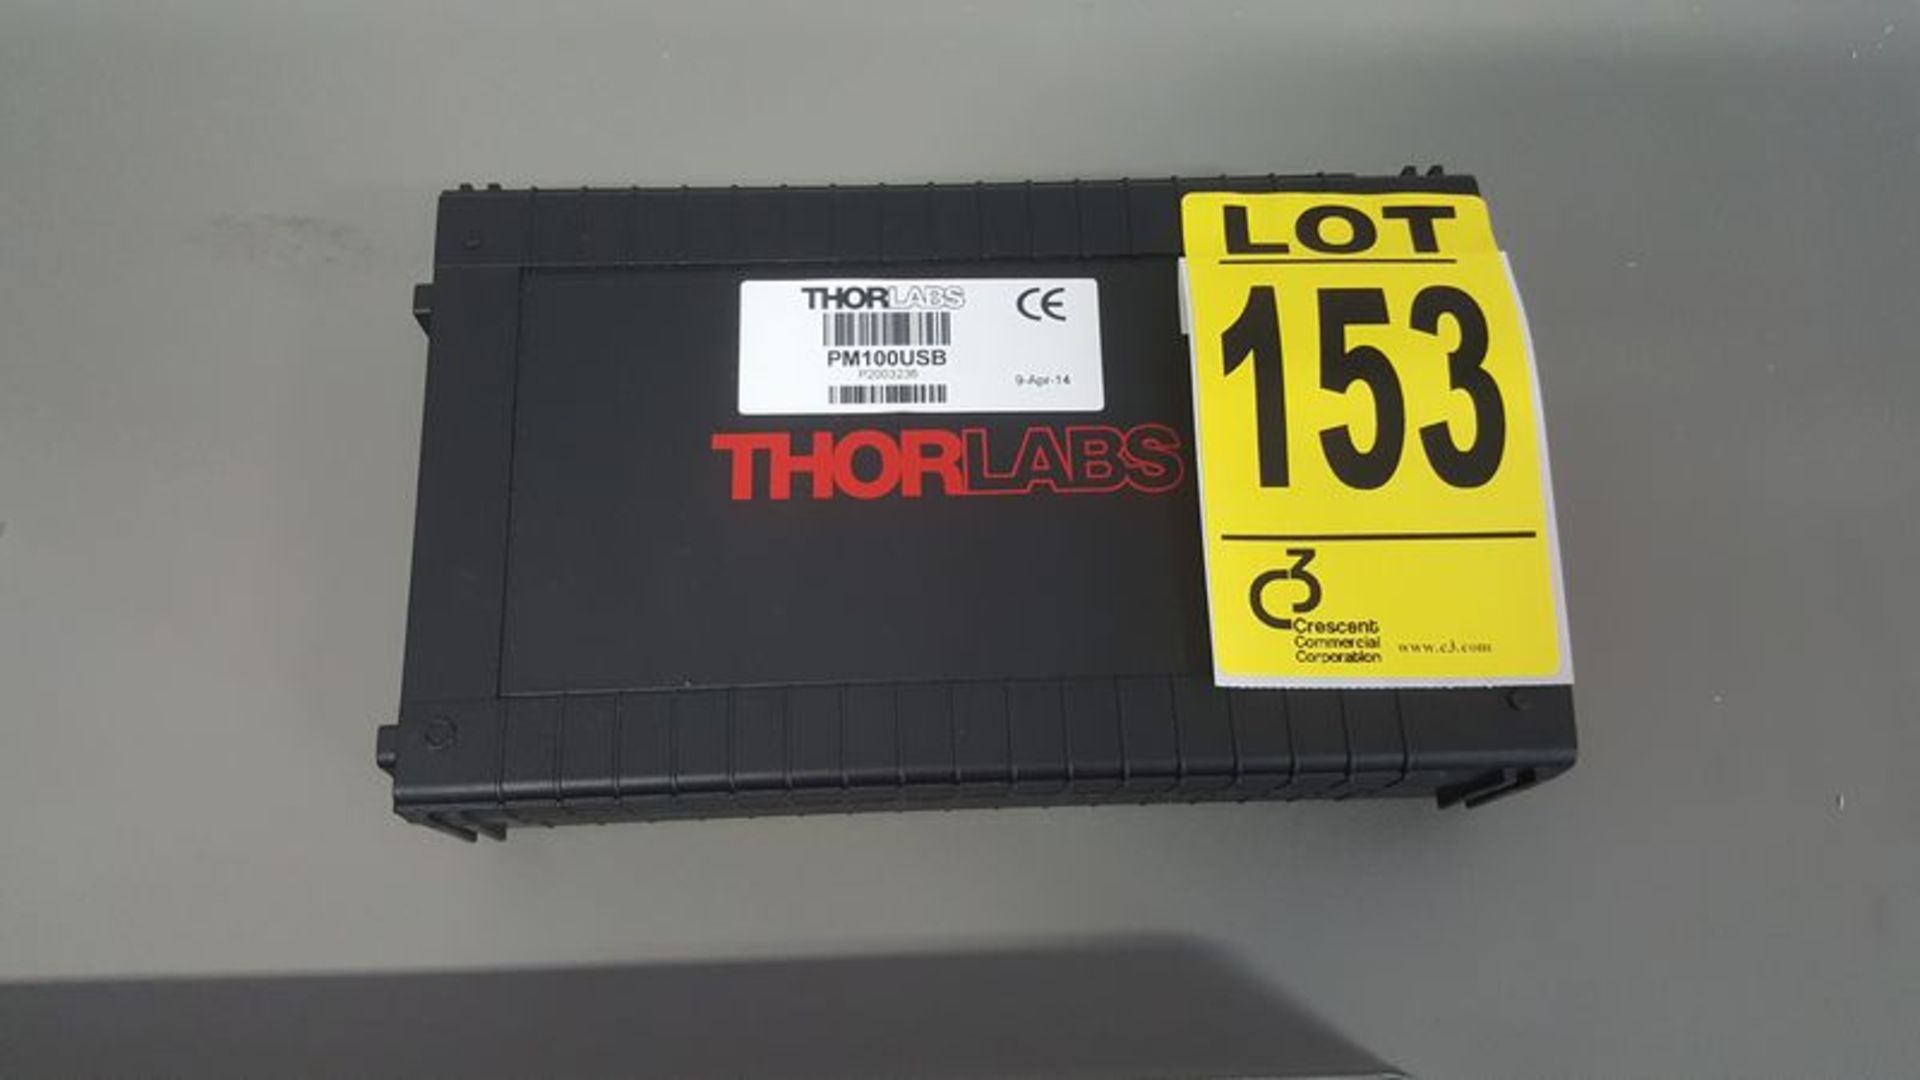 Thorlabs DMD1000USB power and energy meter - Image 2 of 2